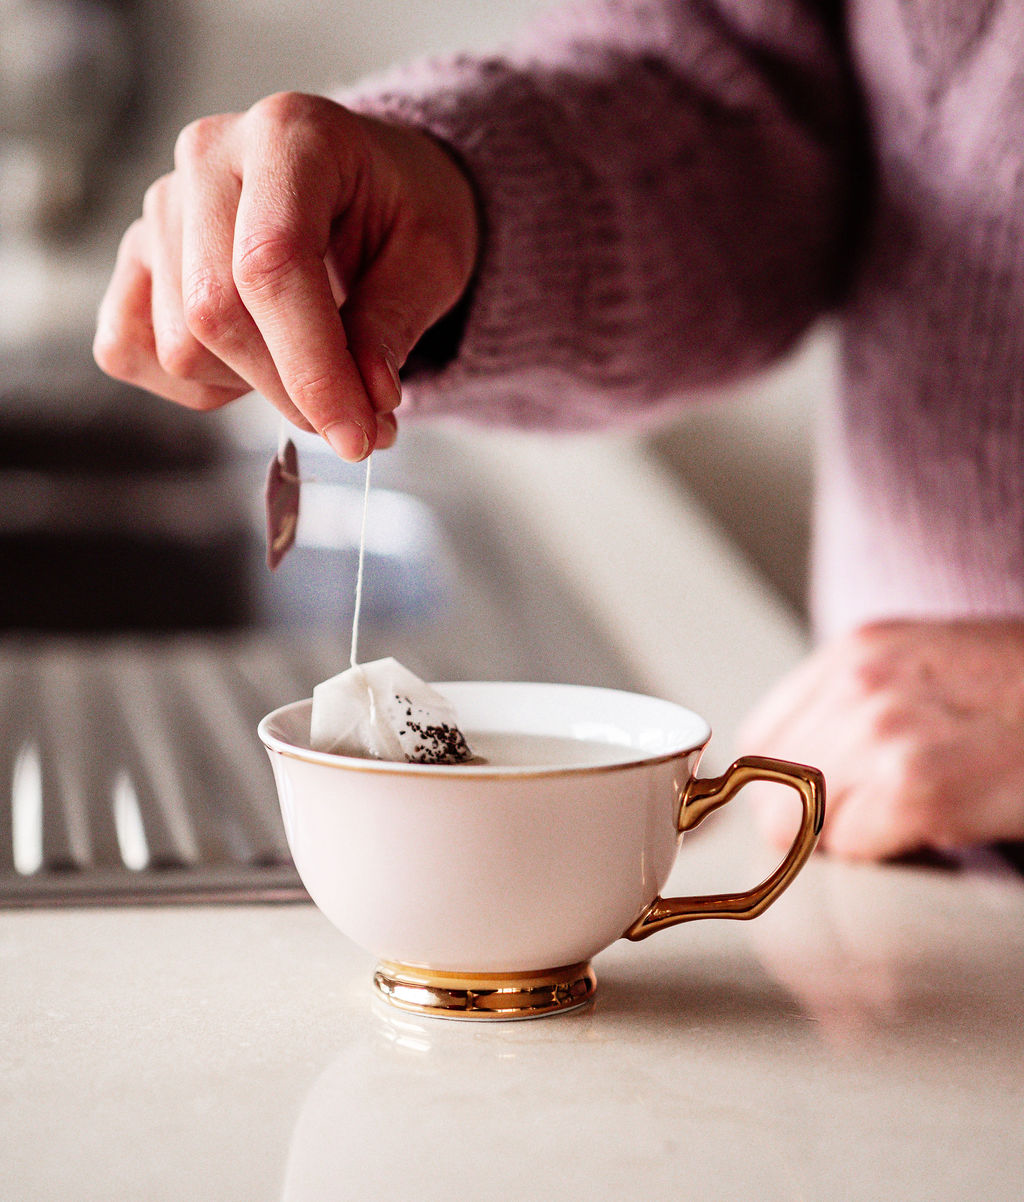 A hand holding a teabag in a cup of tea